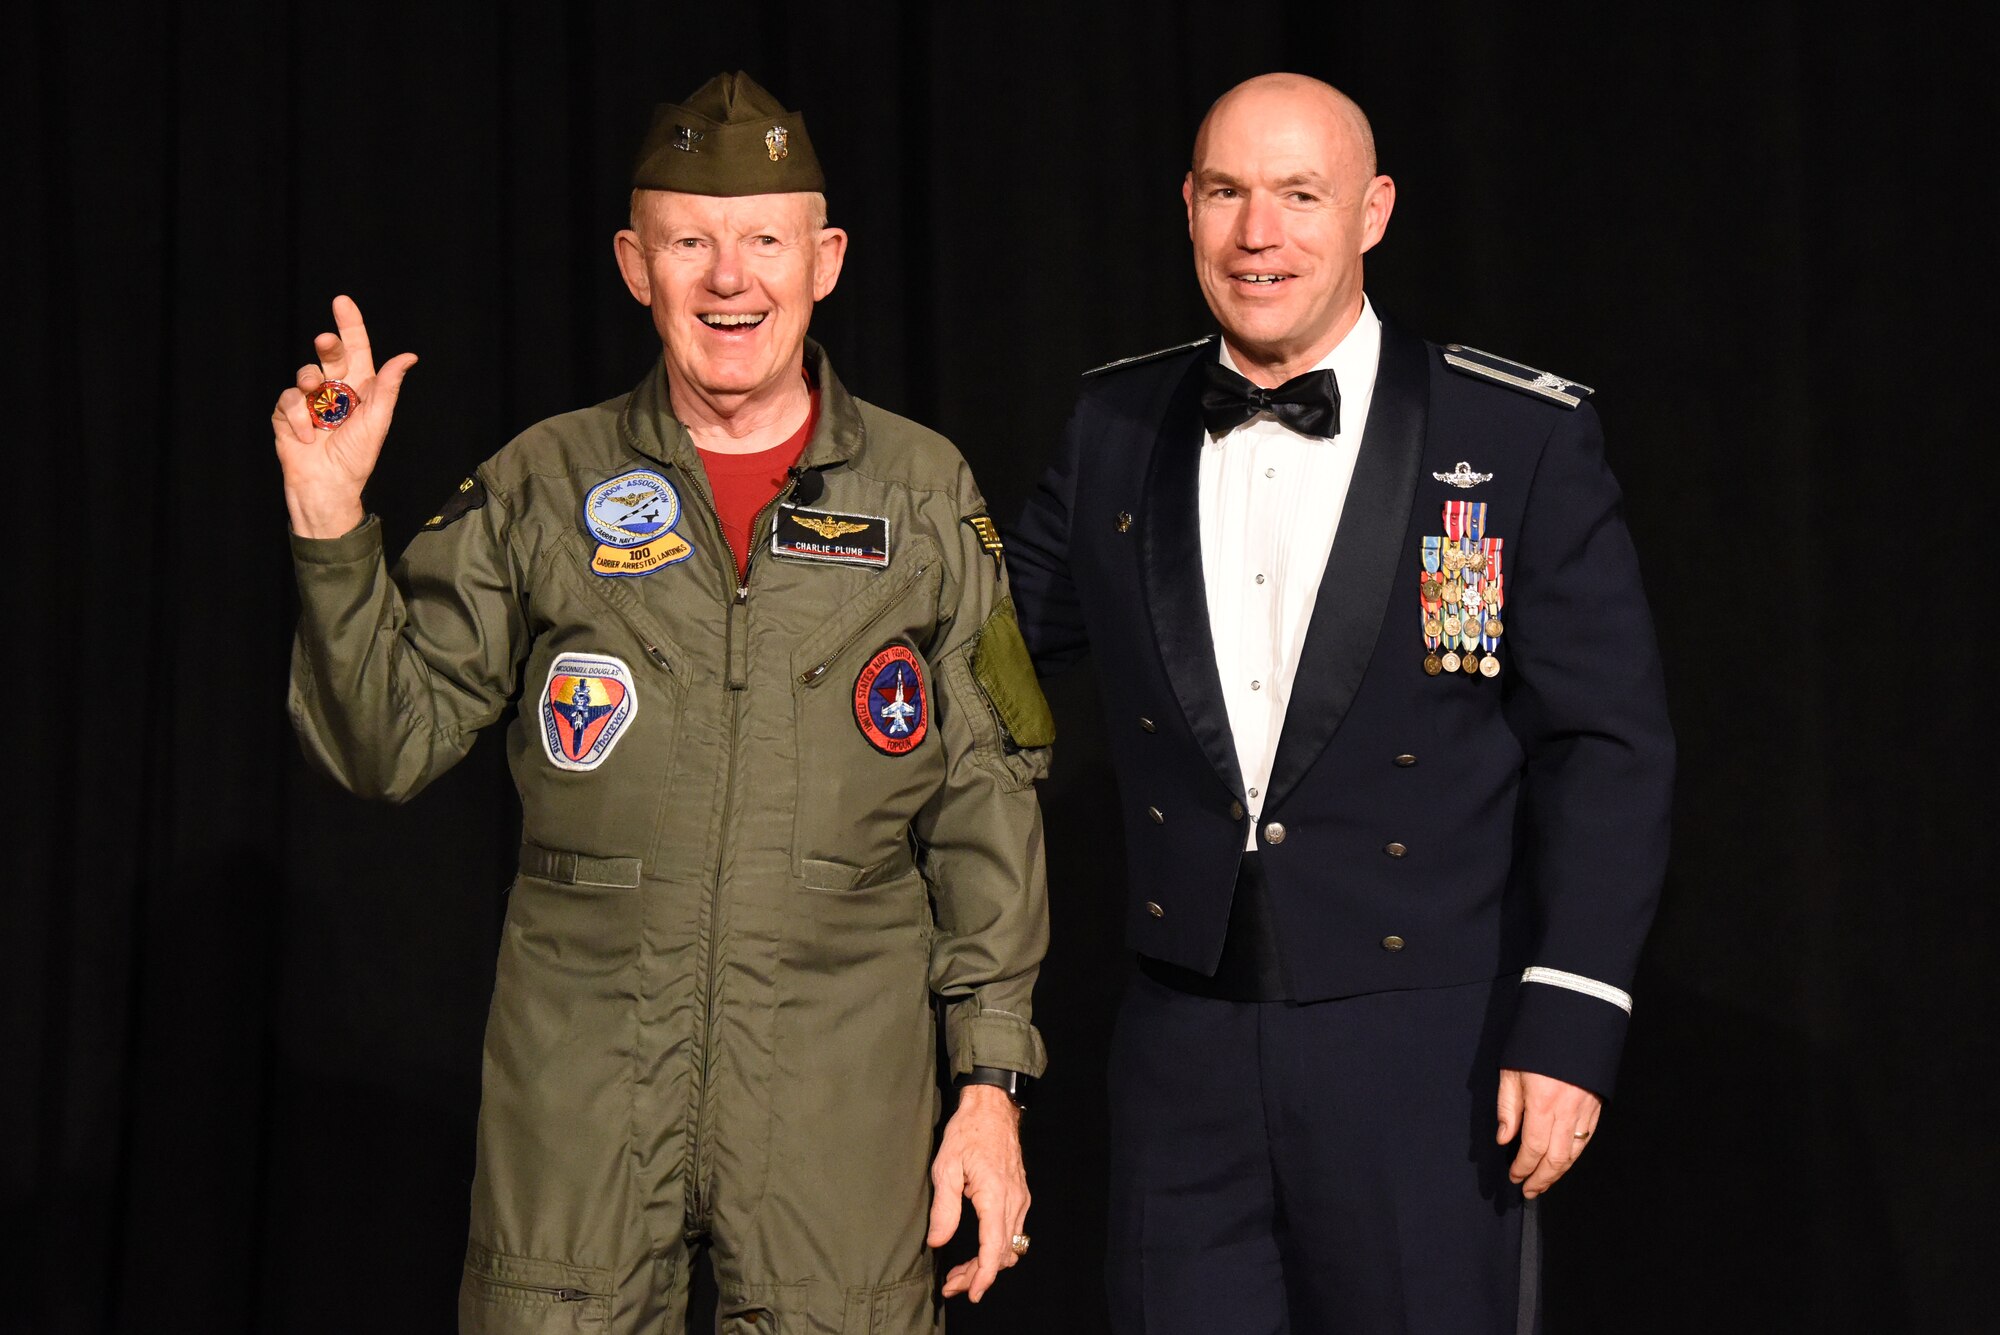 Members of the 944th Fighter Wing put on their best attire to honor the outstanding achievements of the hardest working and most dedicated Airmen during the 2019 944th FW Annual Awards banquet, Feb. 8, at the Wigwam Resort.